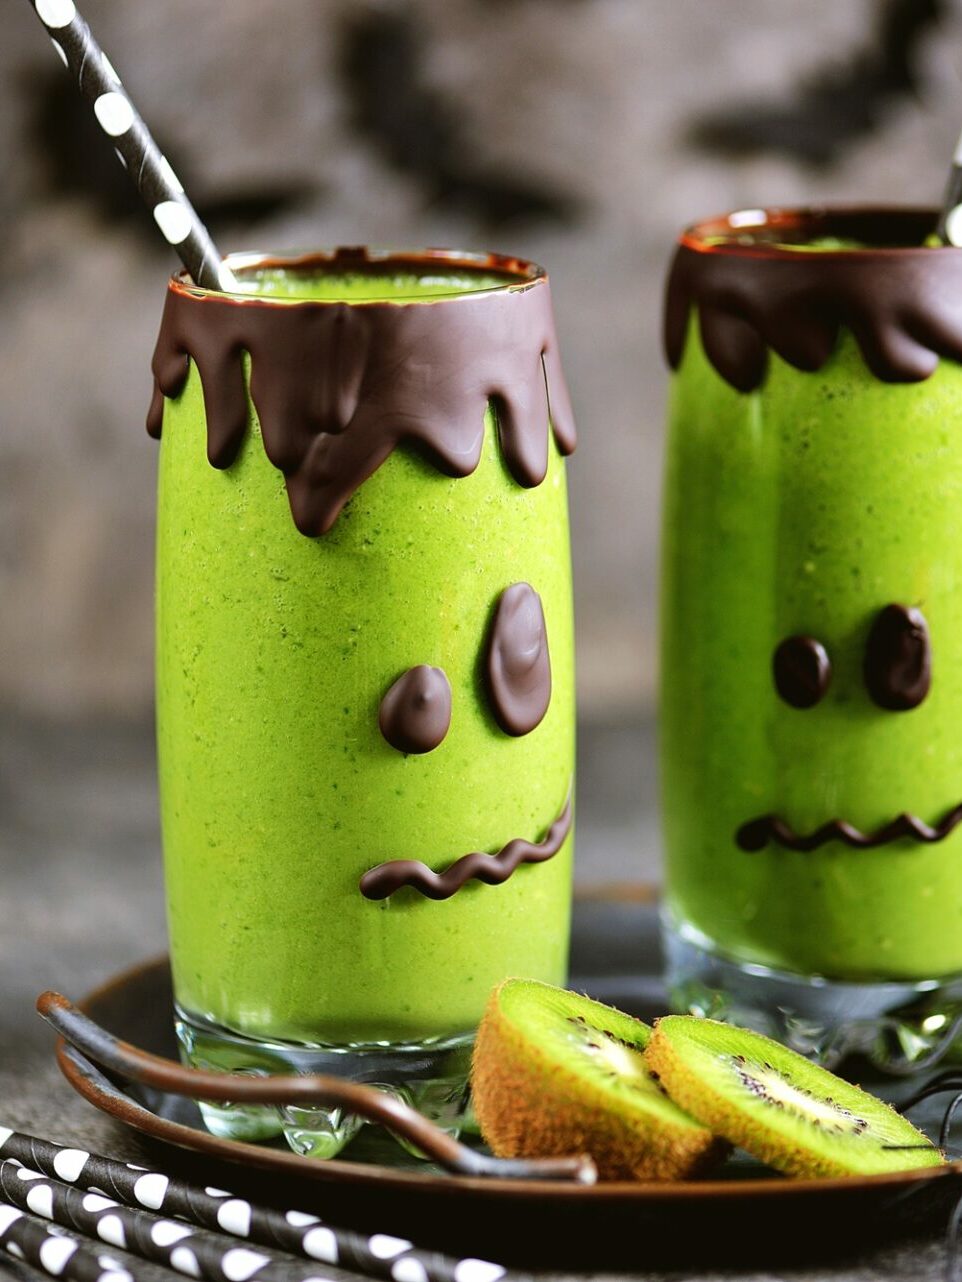 green smoothies made to look like monster faces on the glasses